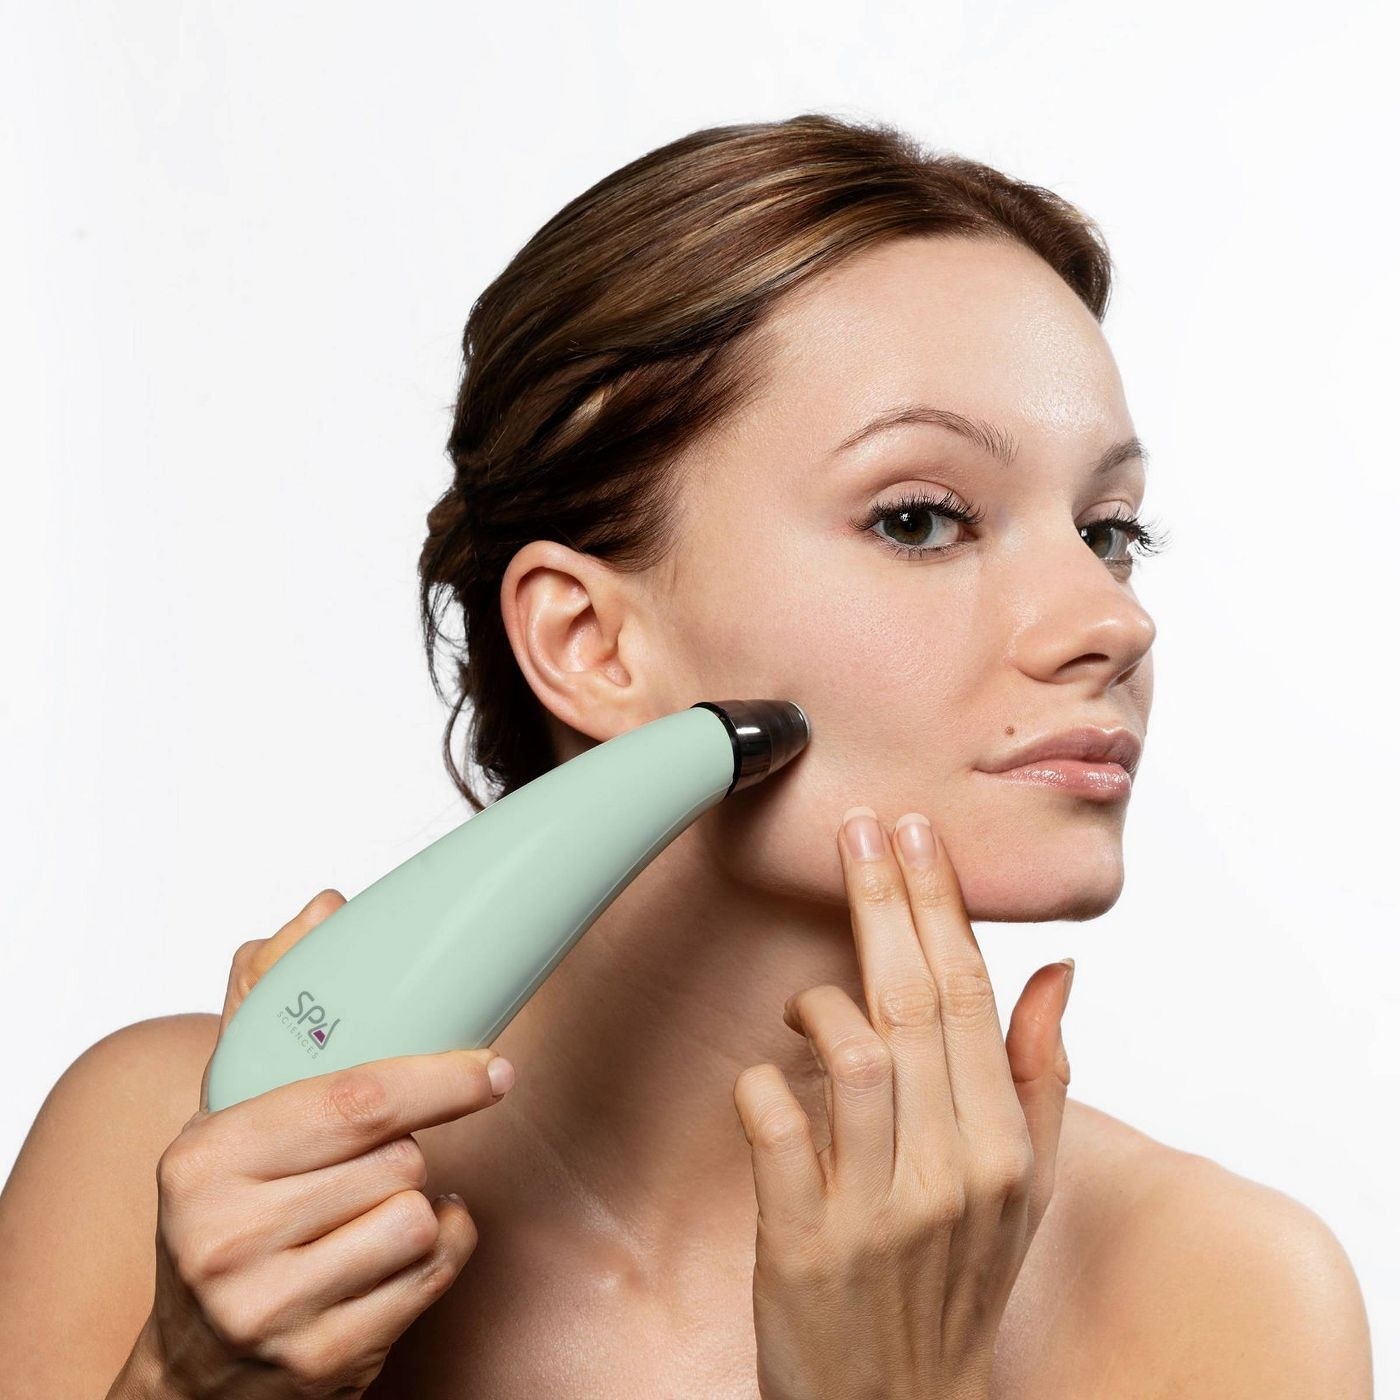 A model using a mint-colored microdermabrasion device